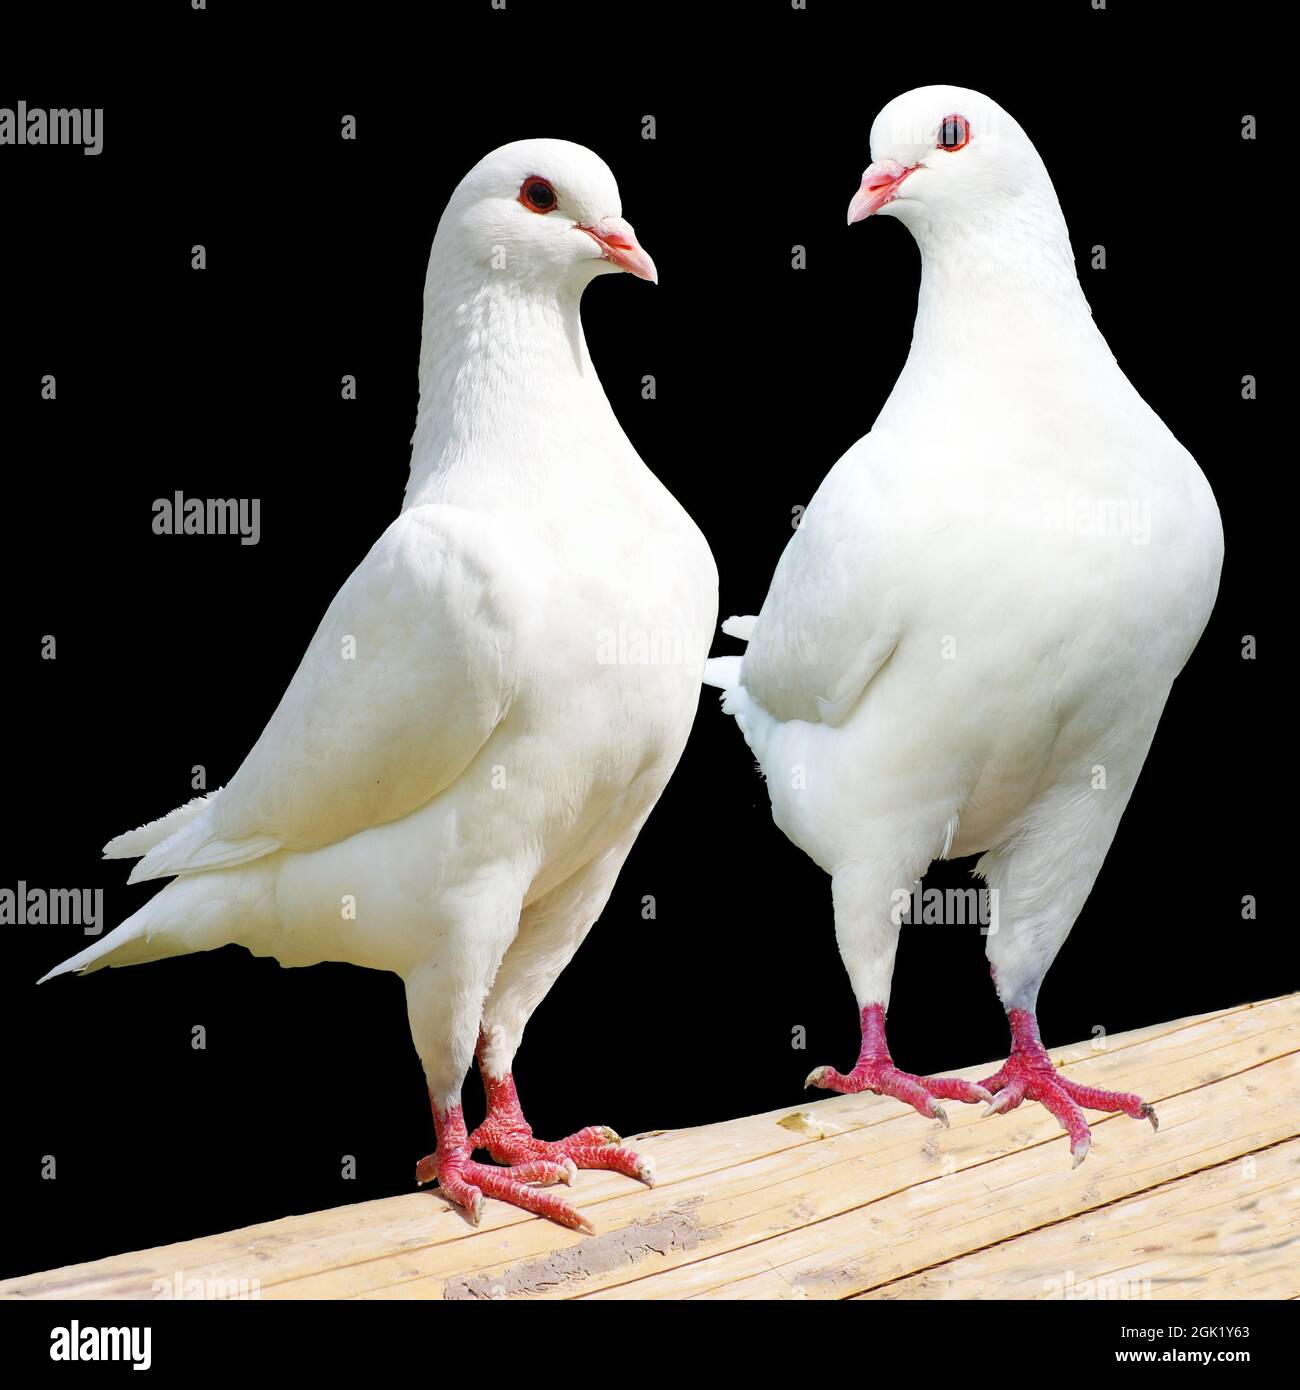 Two white pigeon isolated on black background Stock Photo